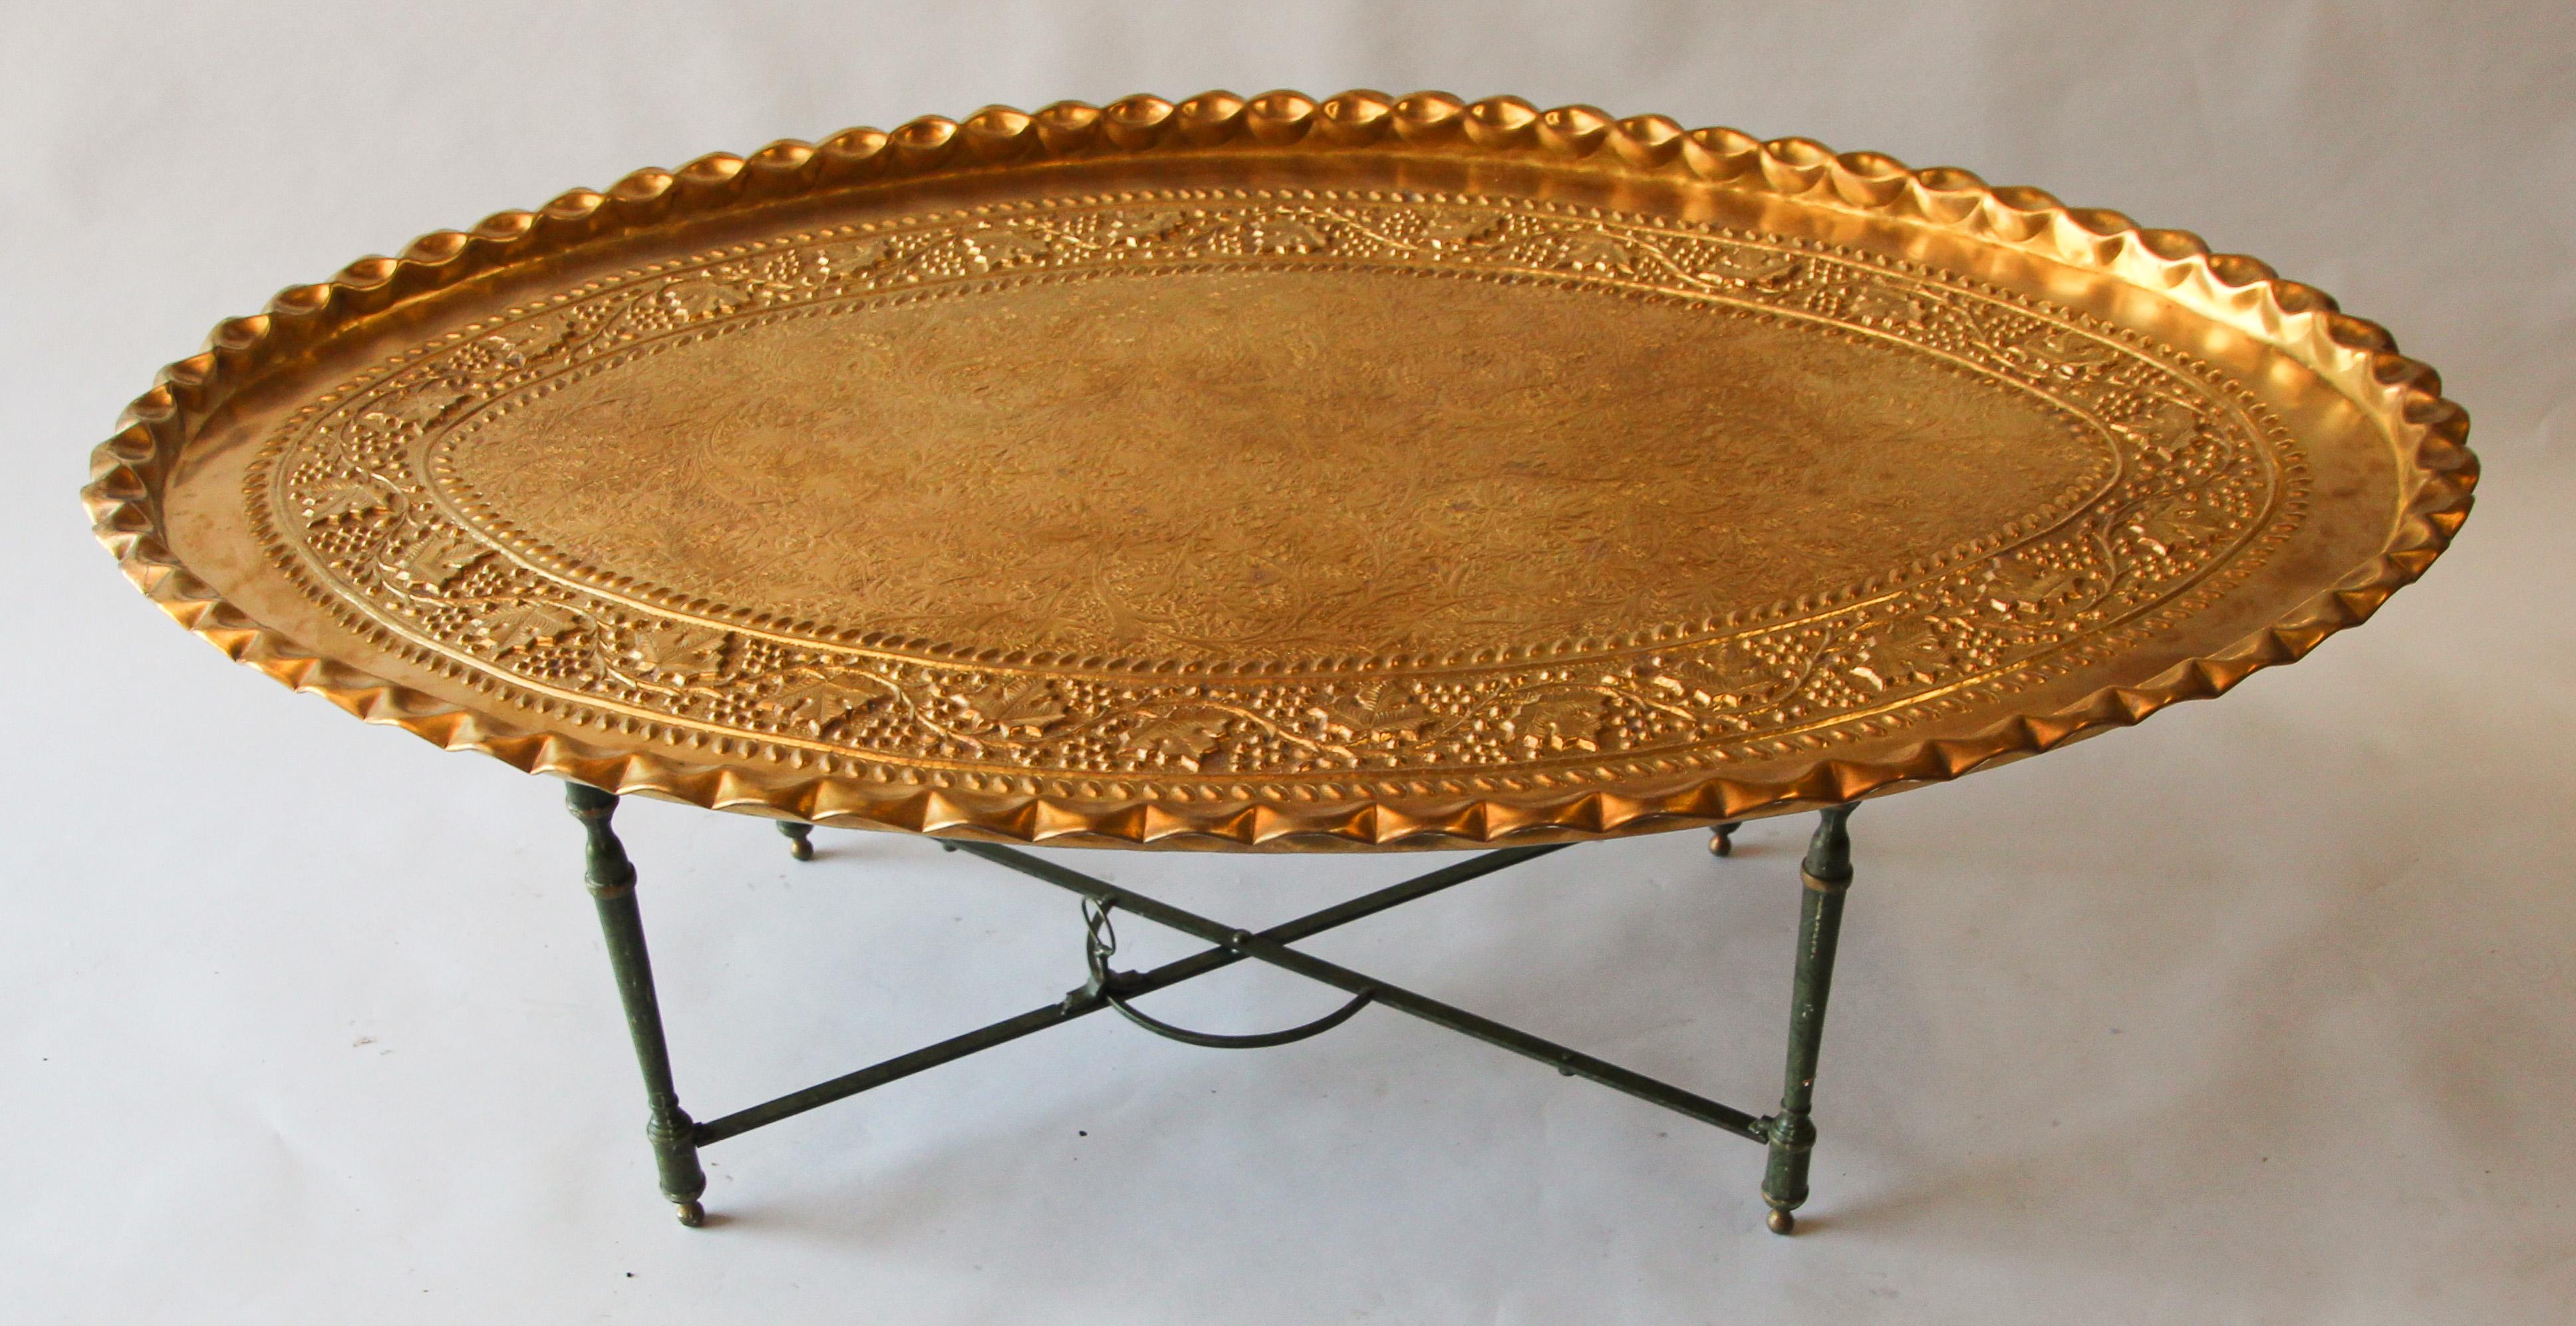 Very large Moroccan oval polished brass tray table.
Beautifully hand chiseled and hand-hammered with exquisite floral and geometric designs and pie crust edging and some cut-out designs. 
The tray sits on a metal folding base.
Dimensions: 53.5